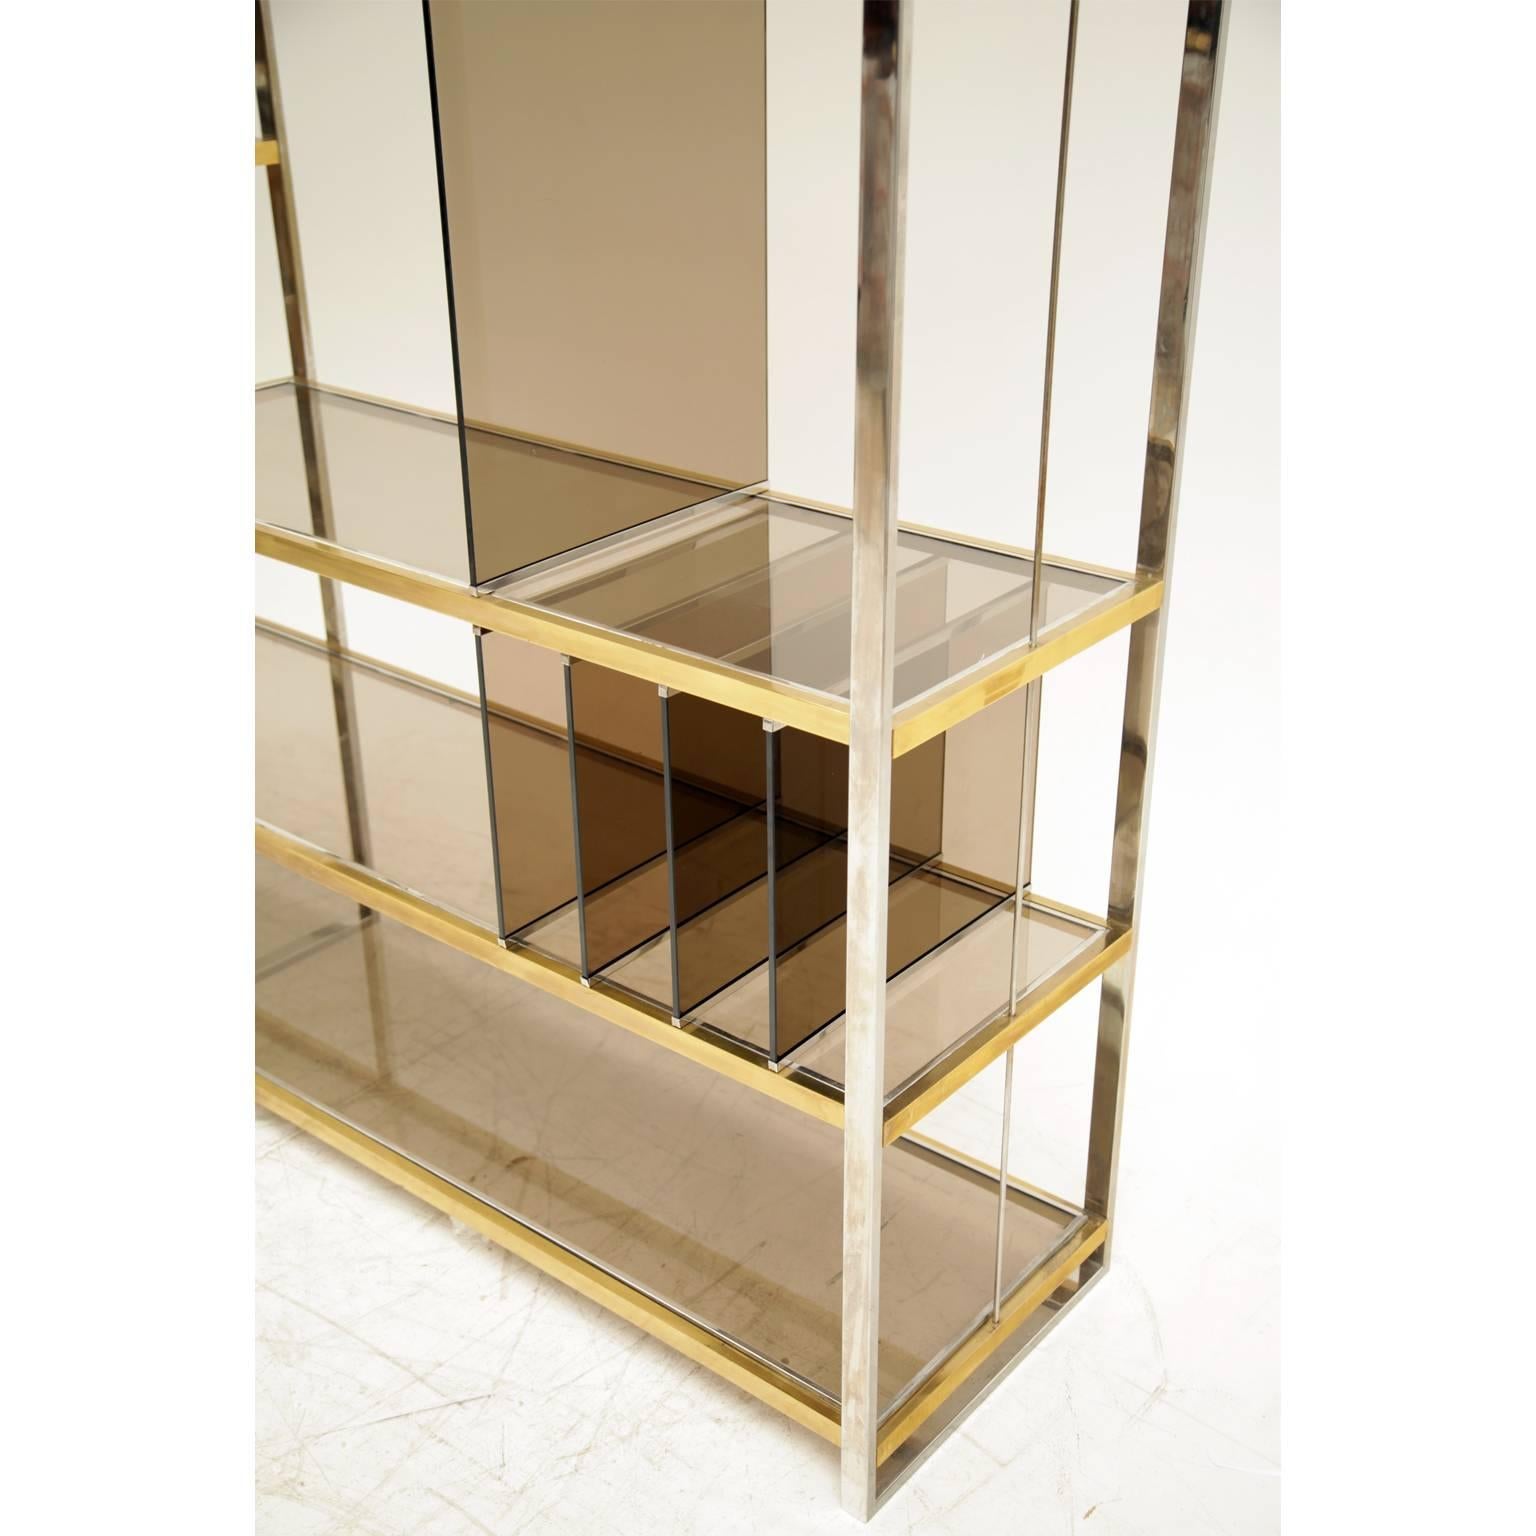 Very tall open shelving system by Romeo Rega out of chrome and brass with smoked glass shelves some spaced perfectly for vinyl records. Could also be used as a room divider.